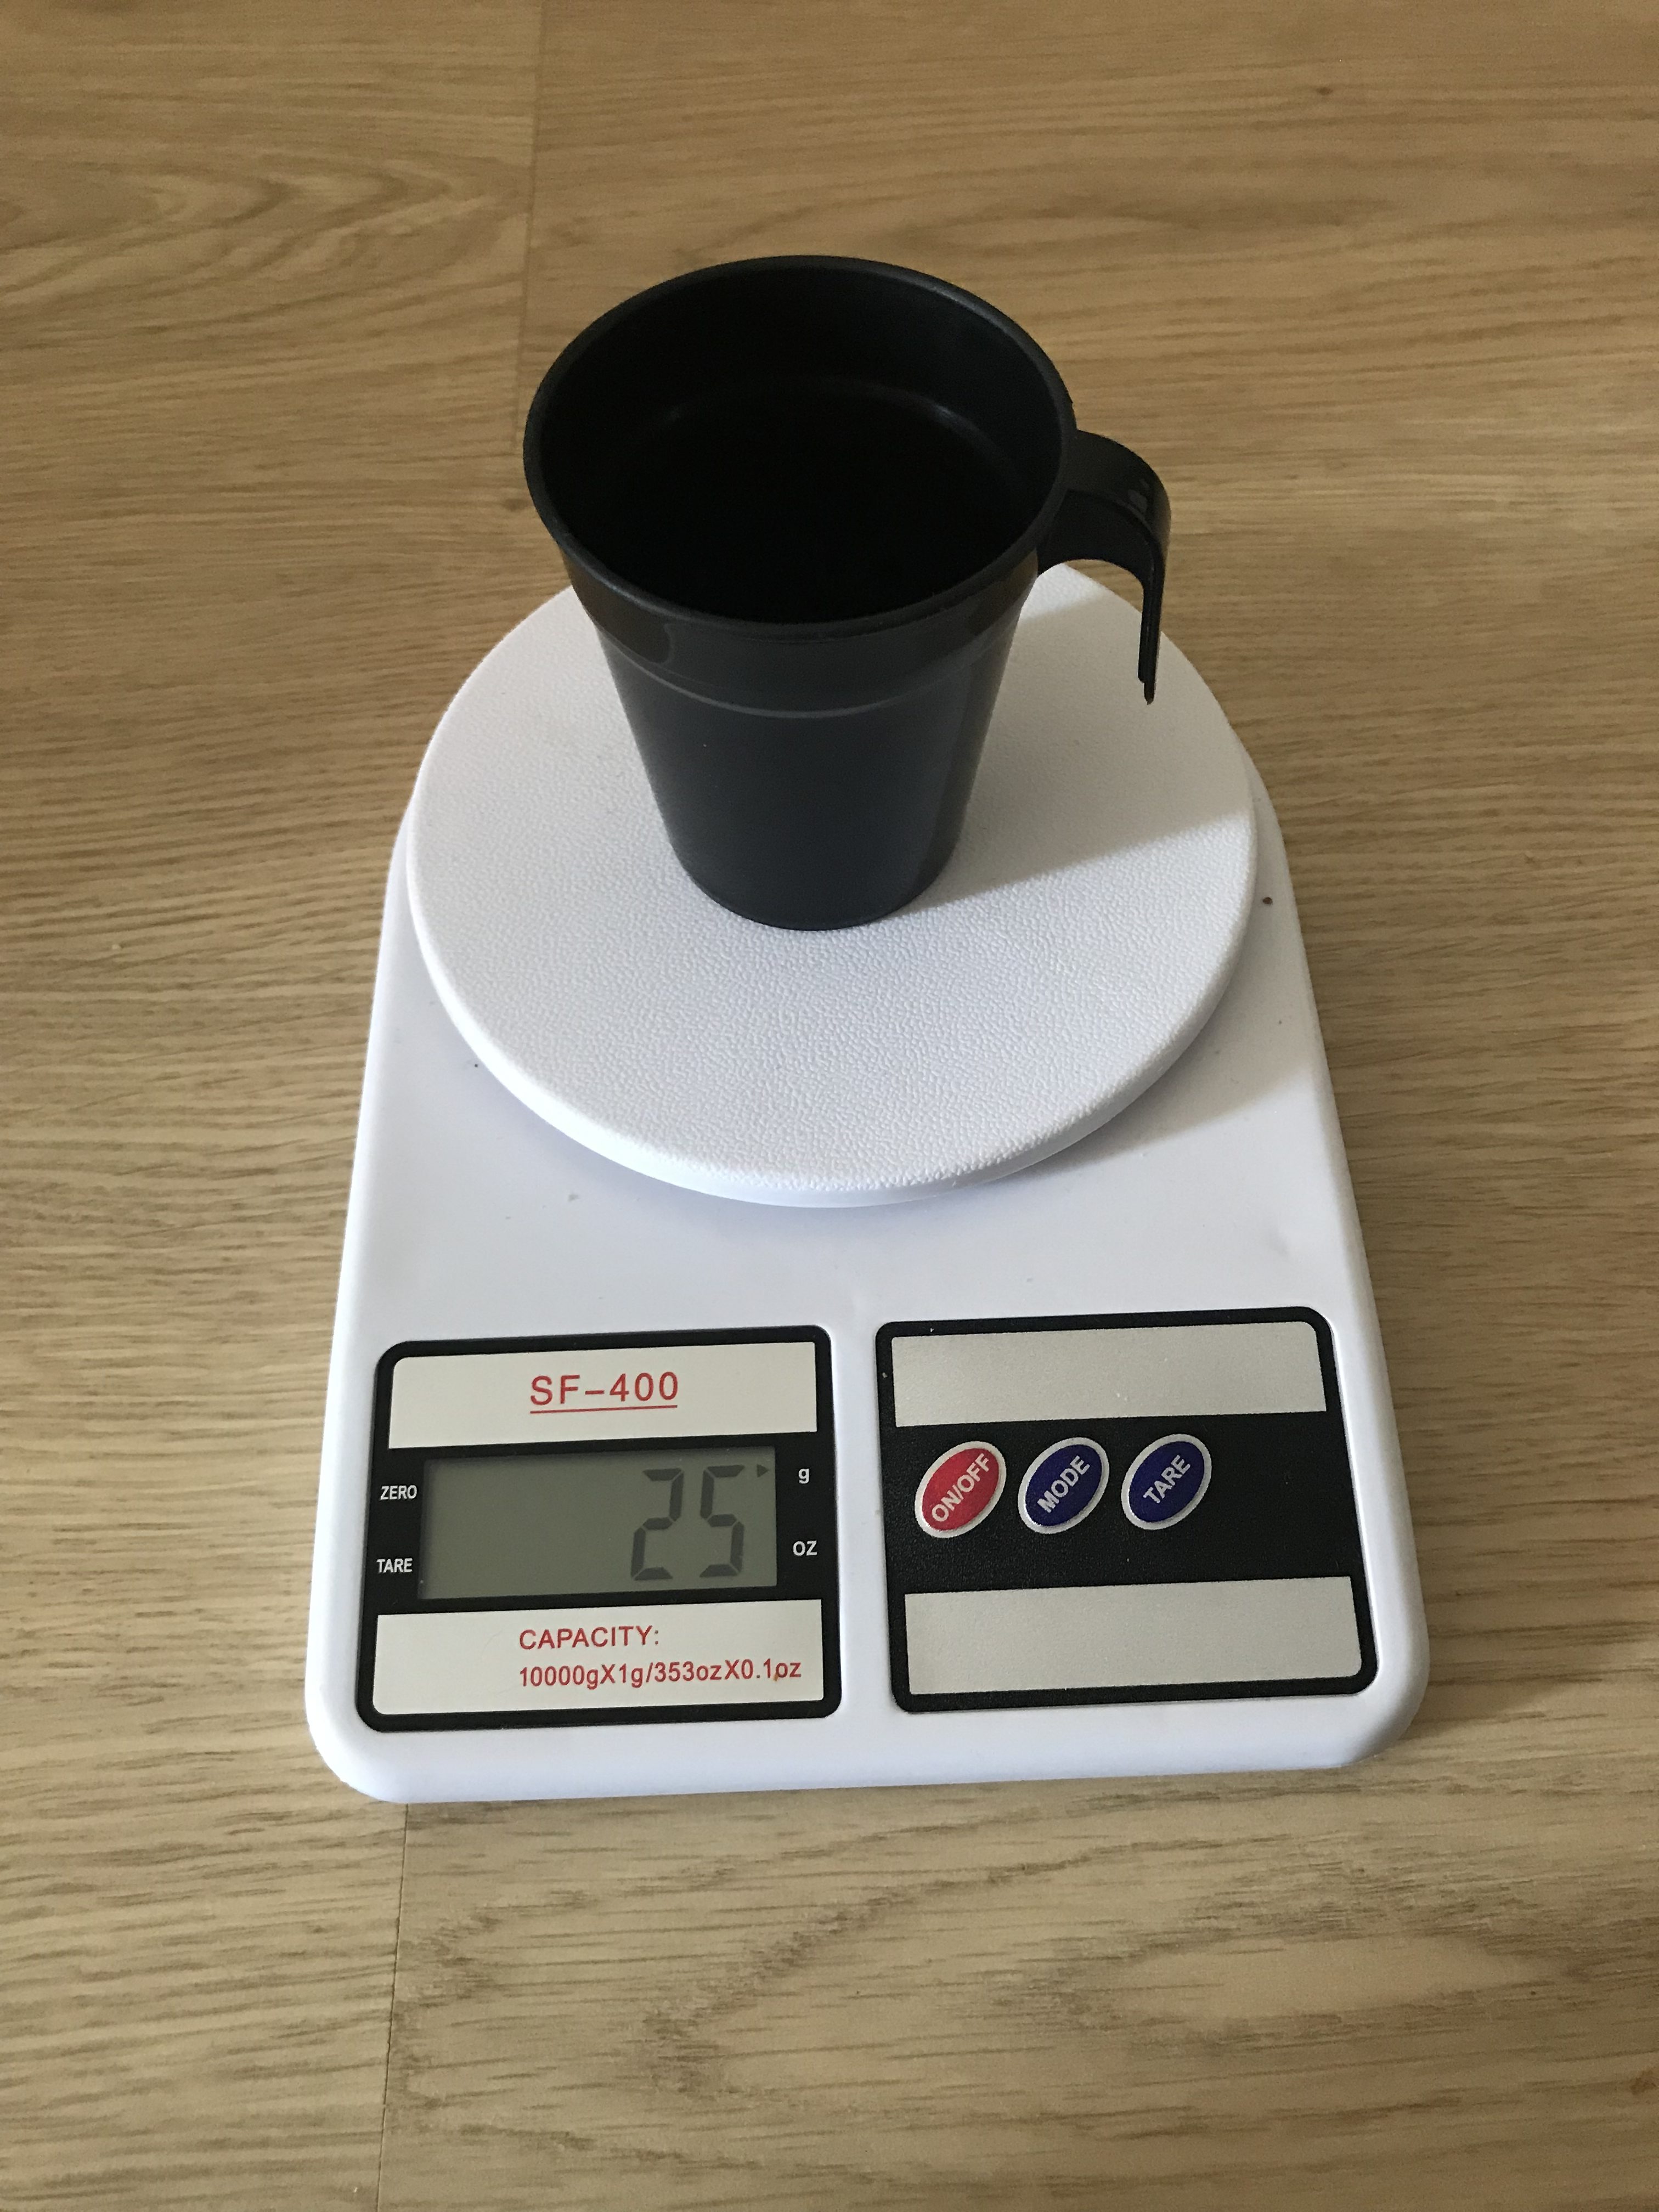 How much does a plastic cup weigh?